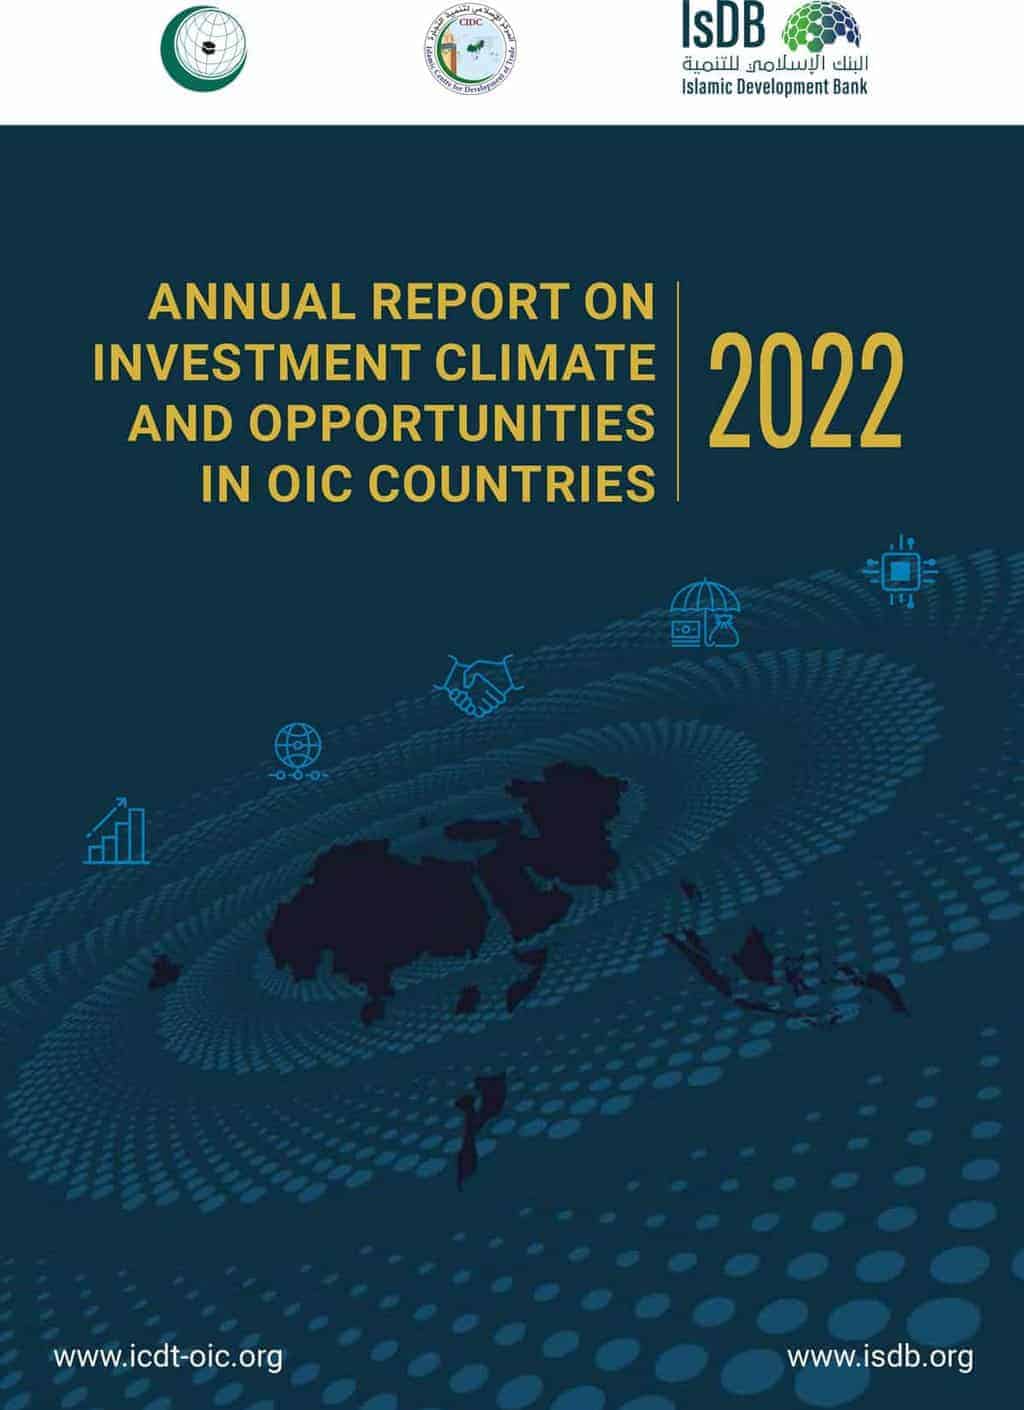 Annual report on investment climate and opportunities in OIC countries